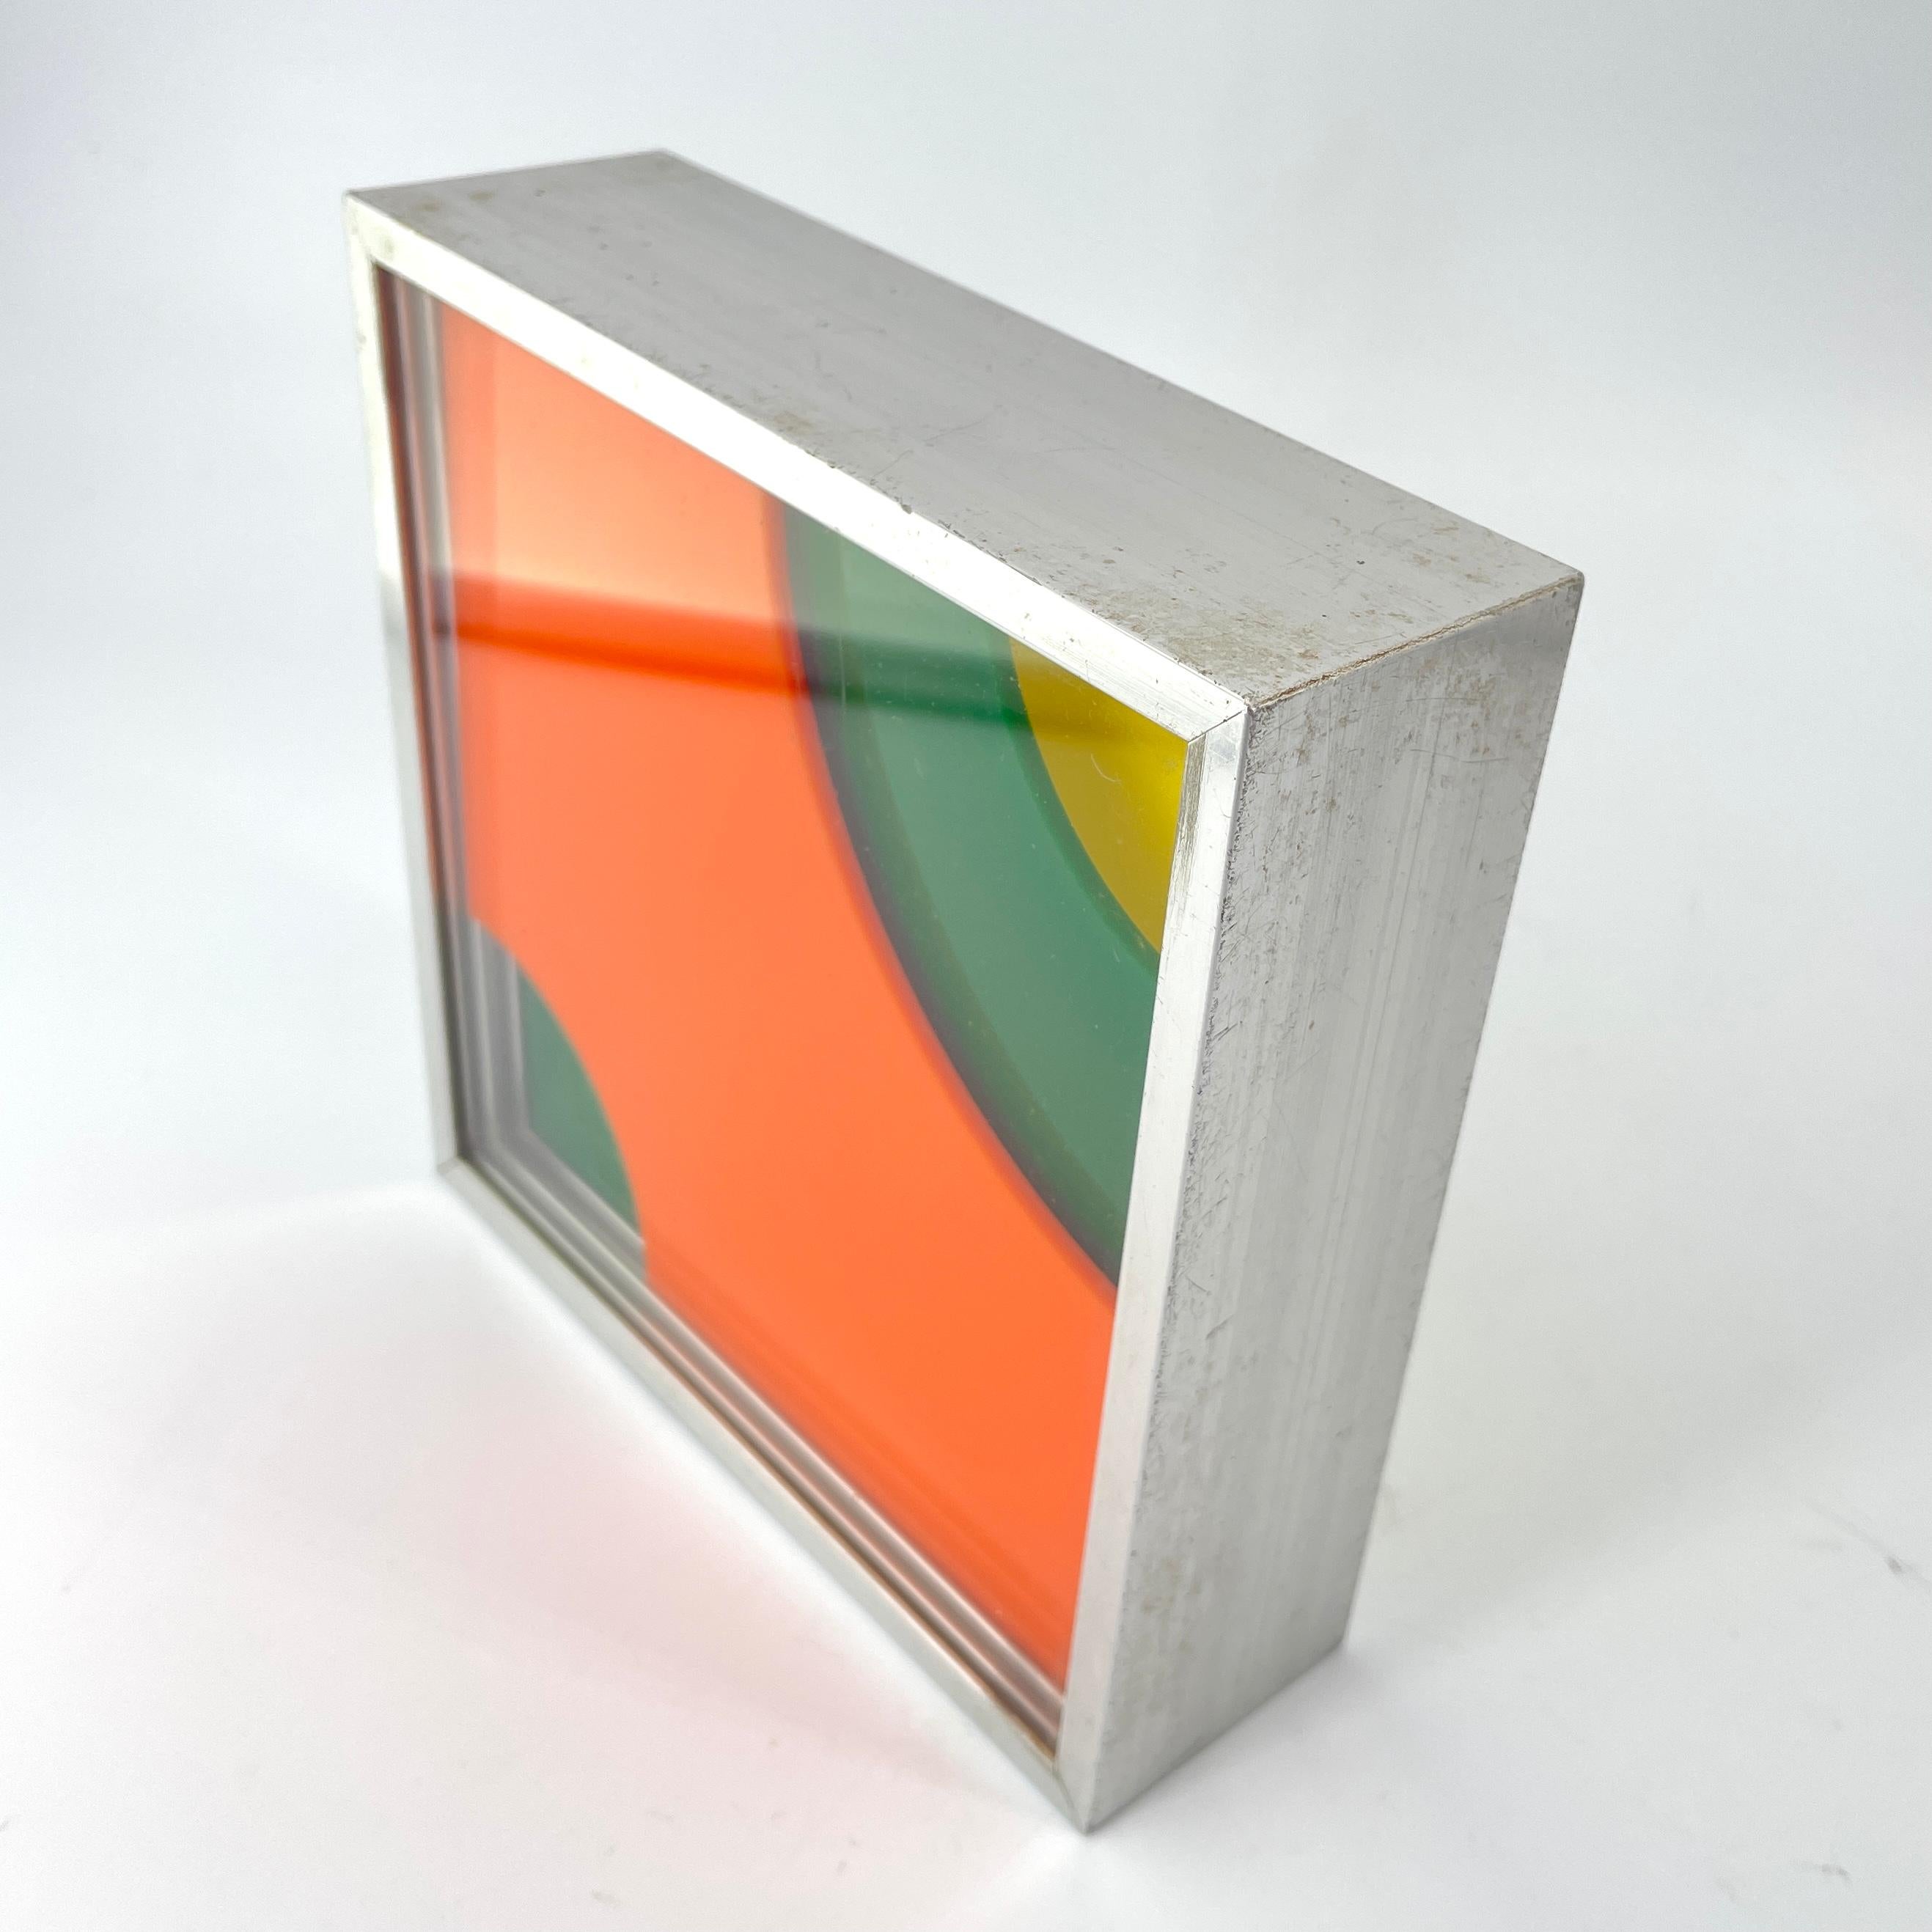 Hand-Crafted 1970s Midcentury Interchangeable Plexiglass Artwork Paperweight Sculpture Toy For Sale